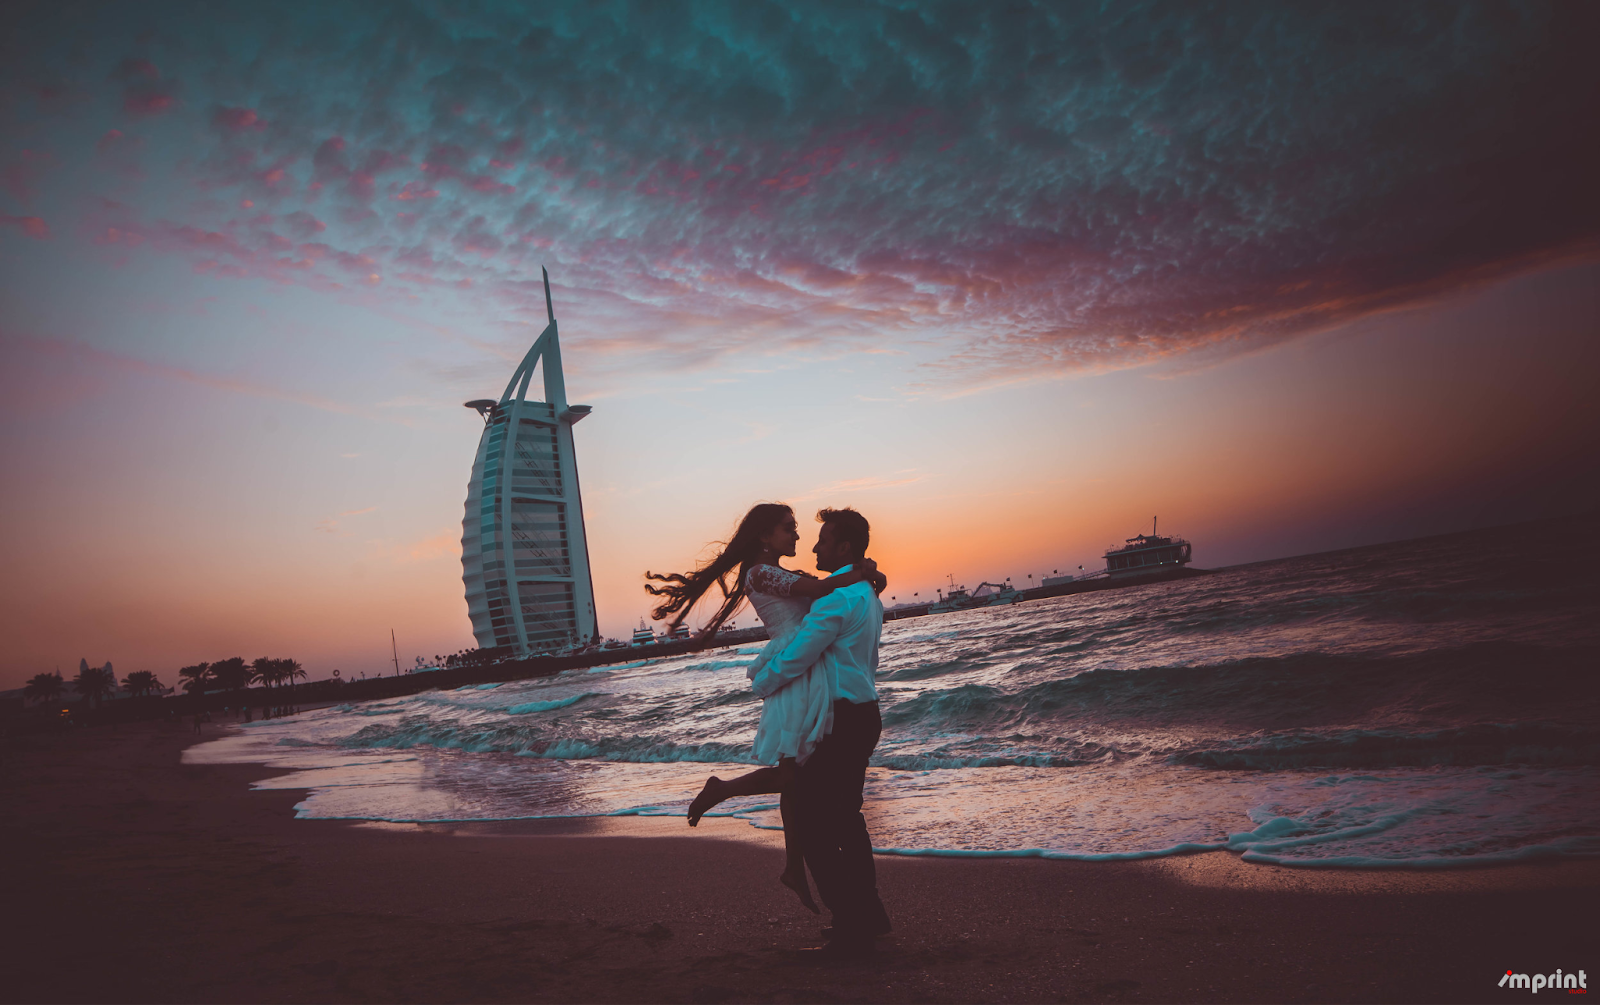 Instagrammable photoshoot locations of Dubai